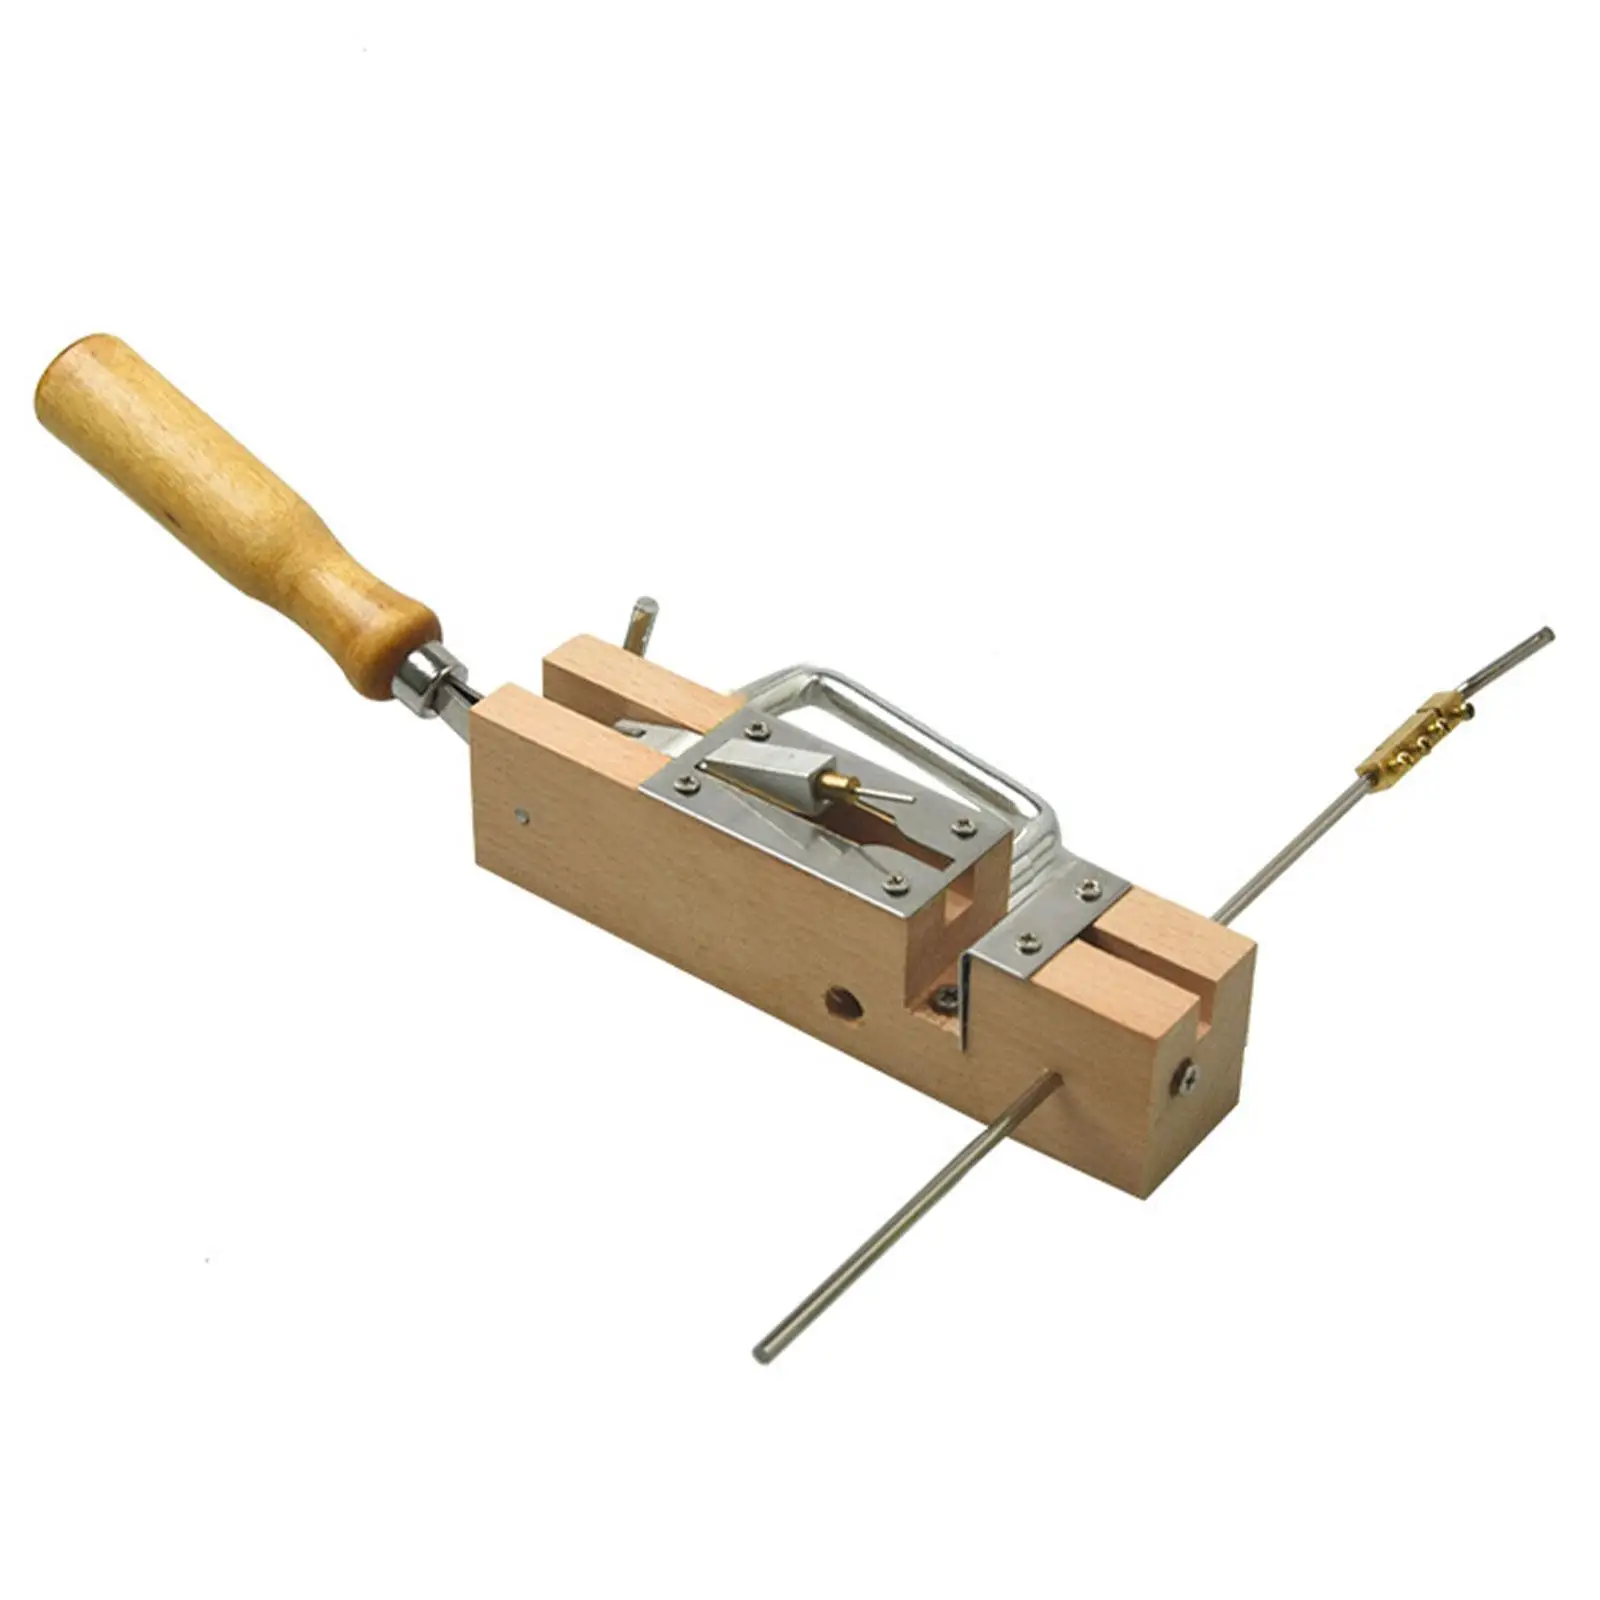 Beehive Hole Puncher Drilling Punch Tool Manual Eyelet Plier Hand Tool Wooden Eyelet Maker Portable Eyelets Puncher Machine